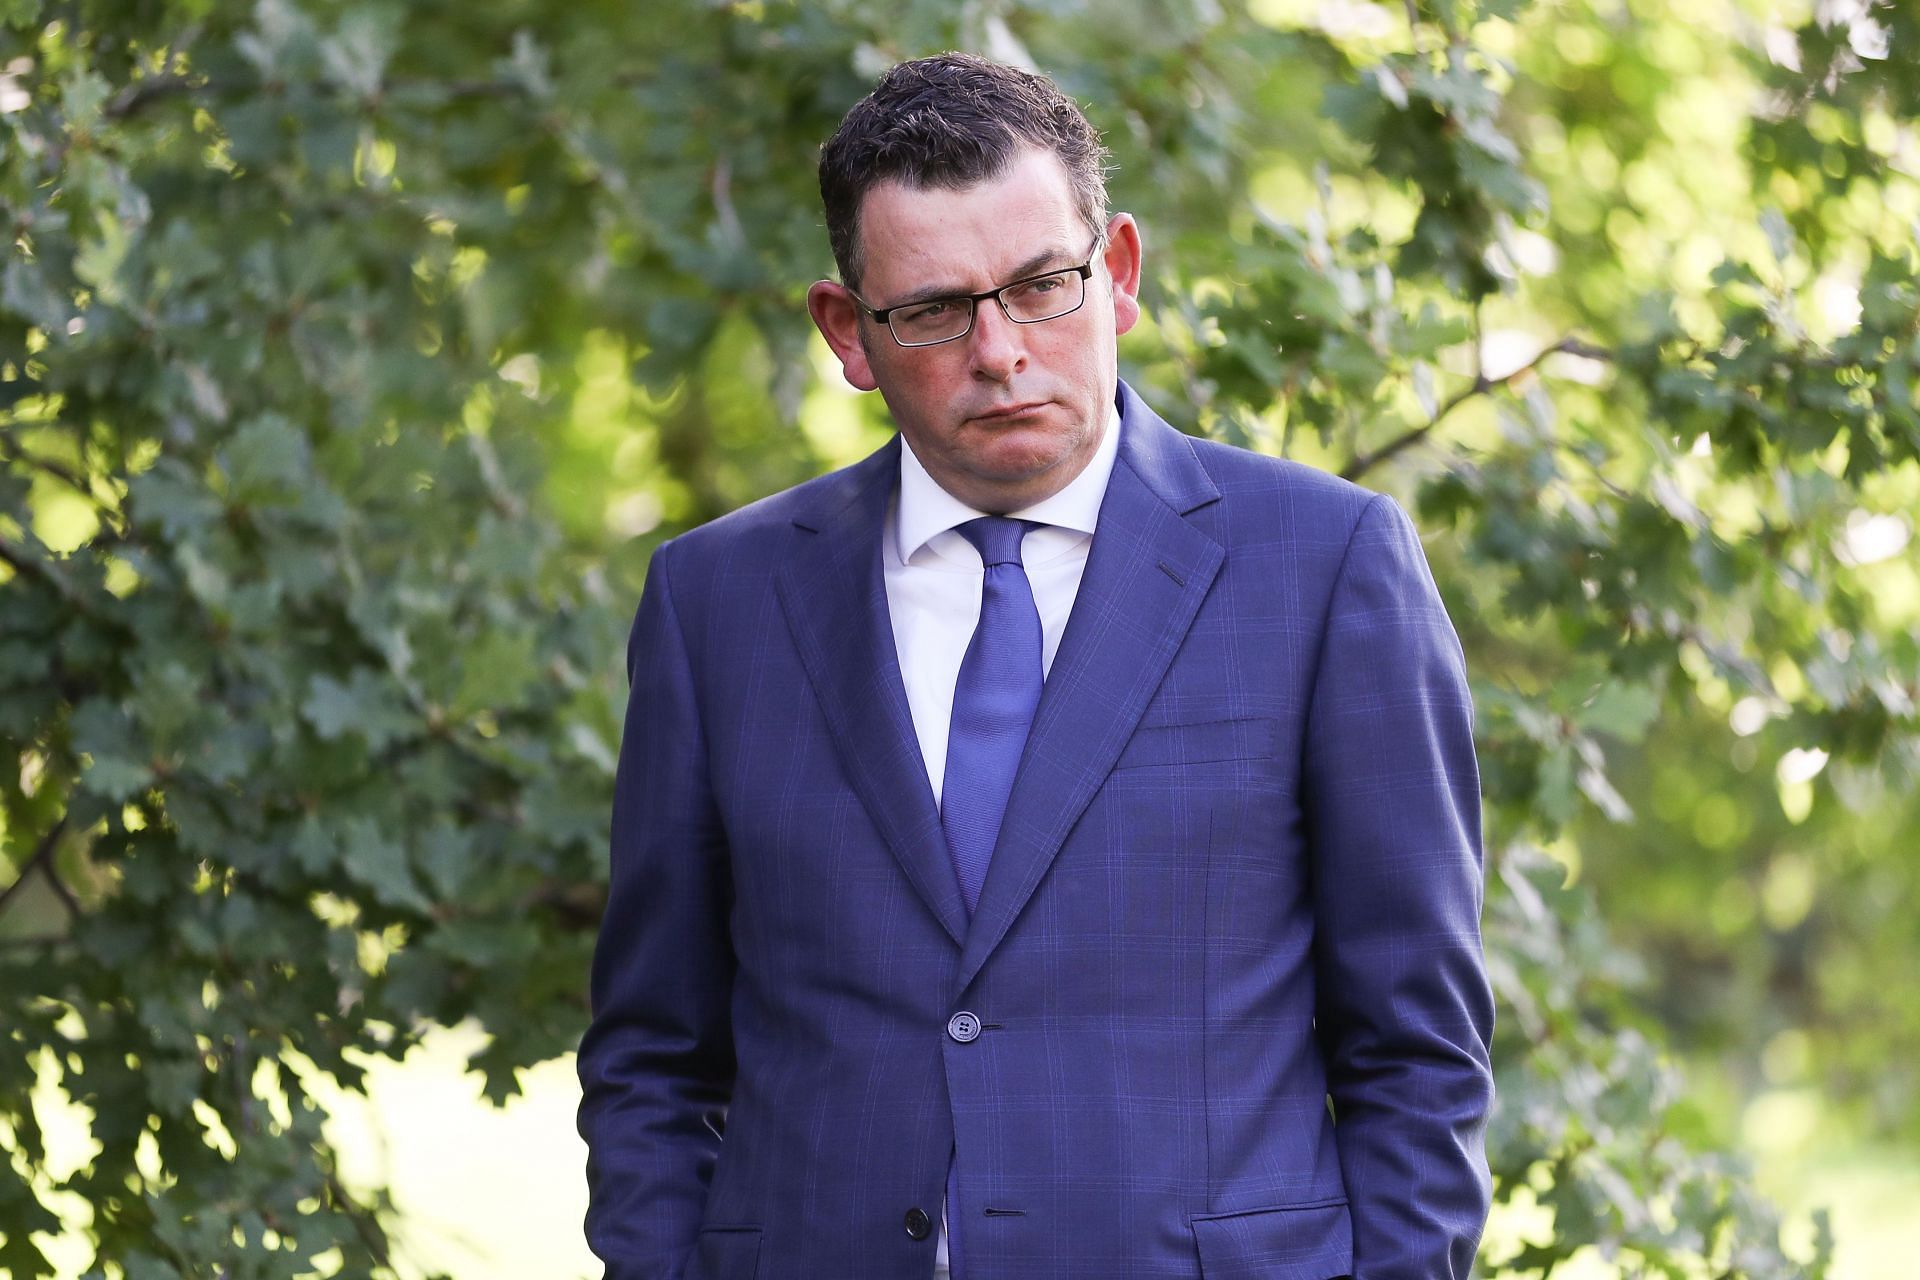 Daniel Andrews is not interested in allowing unvaccinated players into the 2022 Australian Open